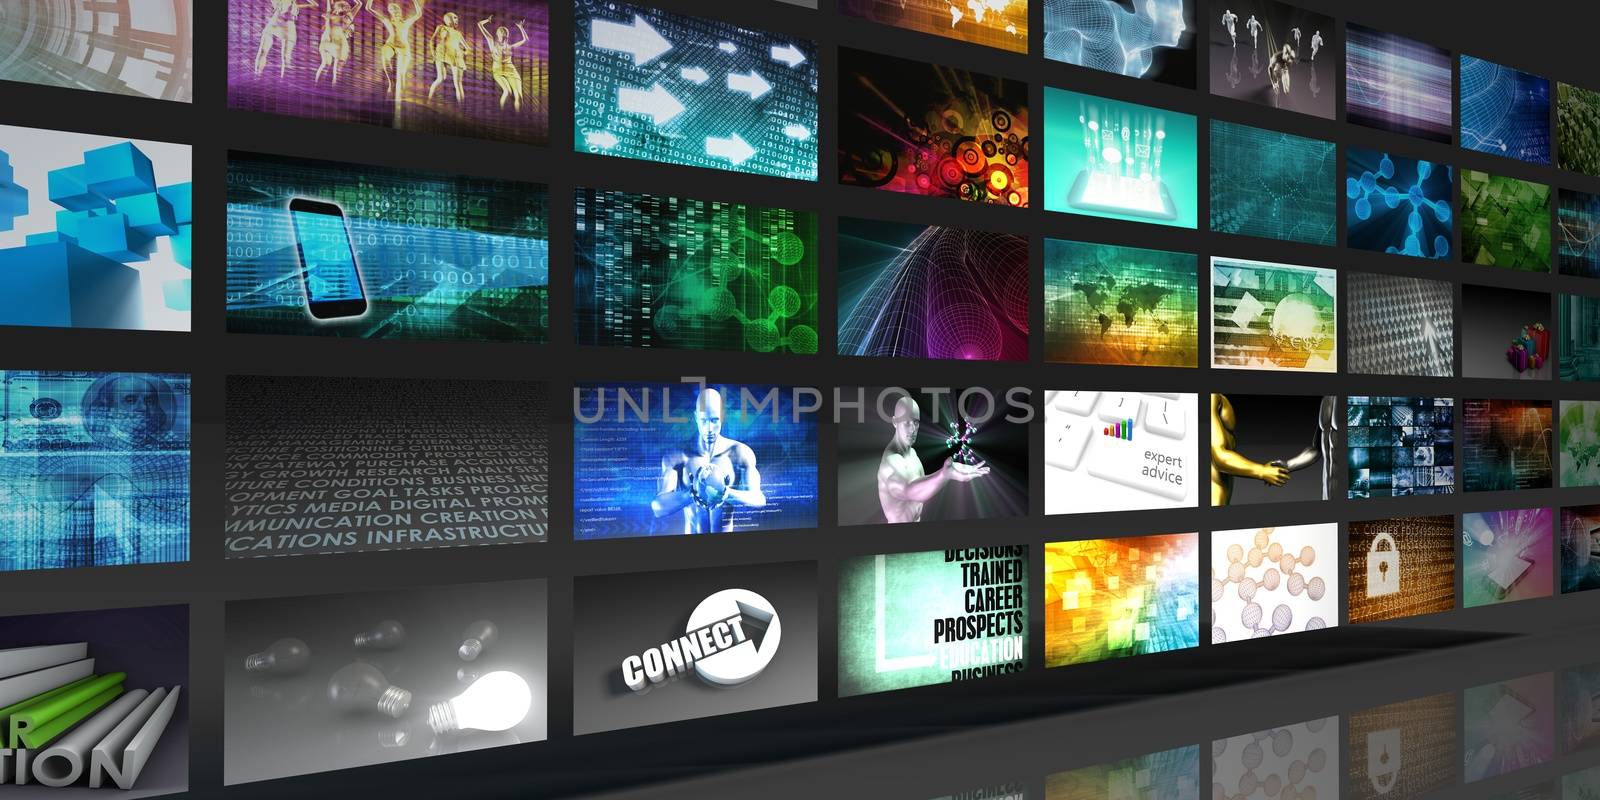 Media Technologies Concept as a Video Wall Background